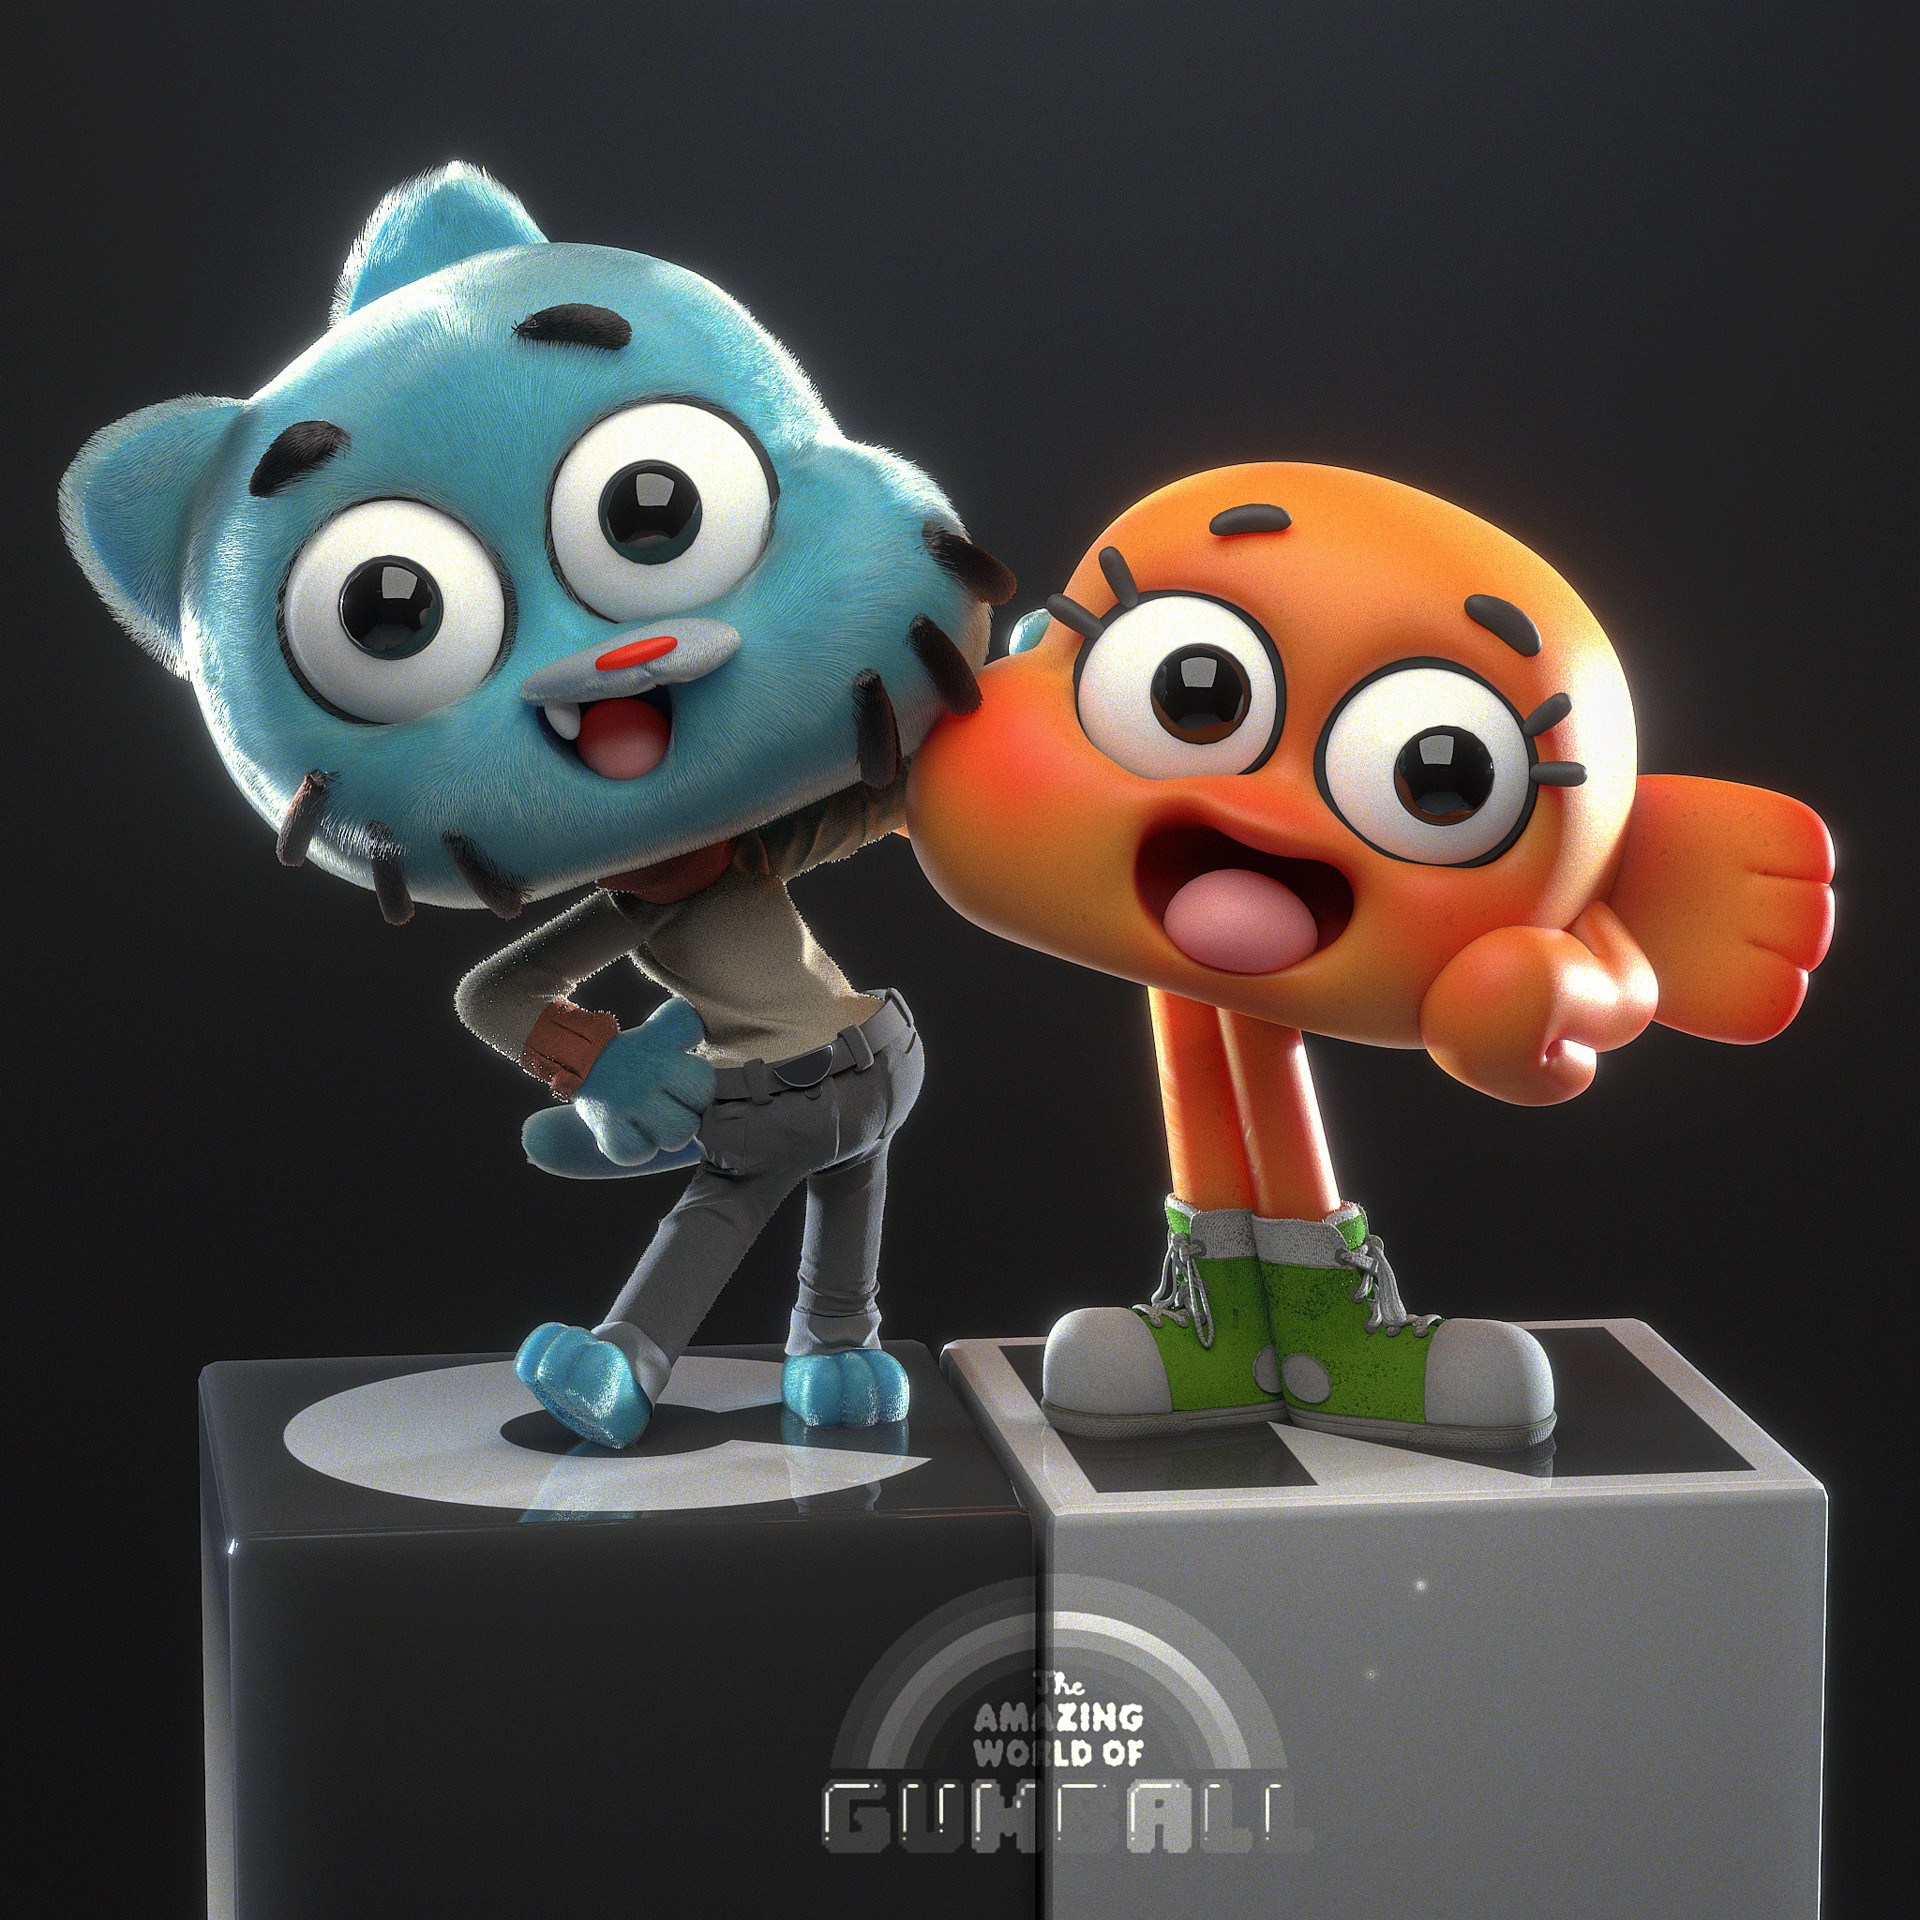 how to get gumball in zbrush